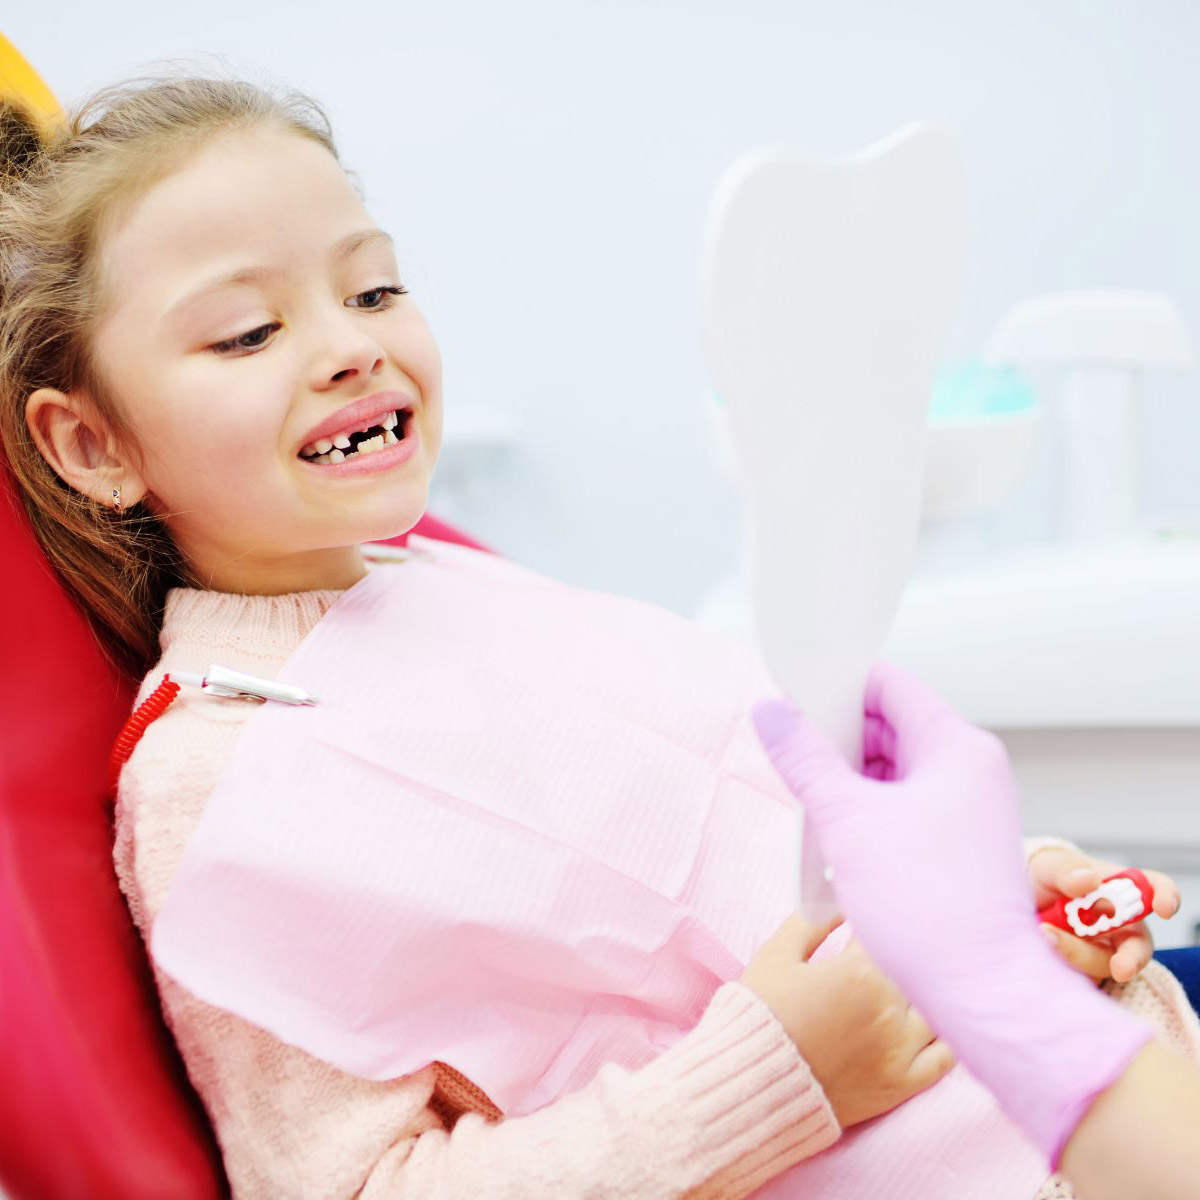 Little girl sitting on dental chair in pediatric dentists office. Early prevention, oral hygiene and milk teeth care.